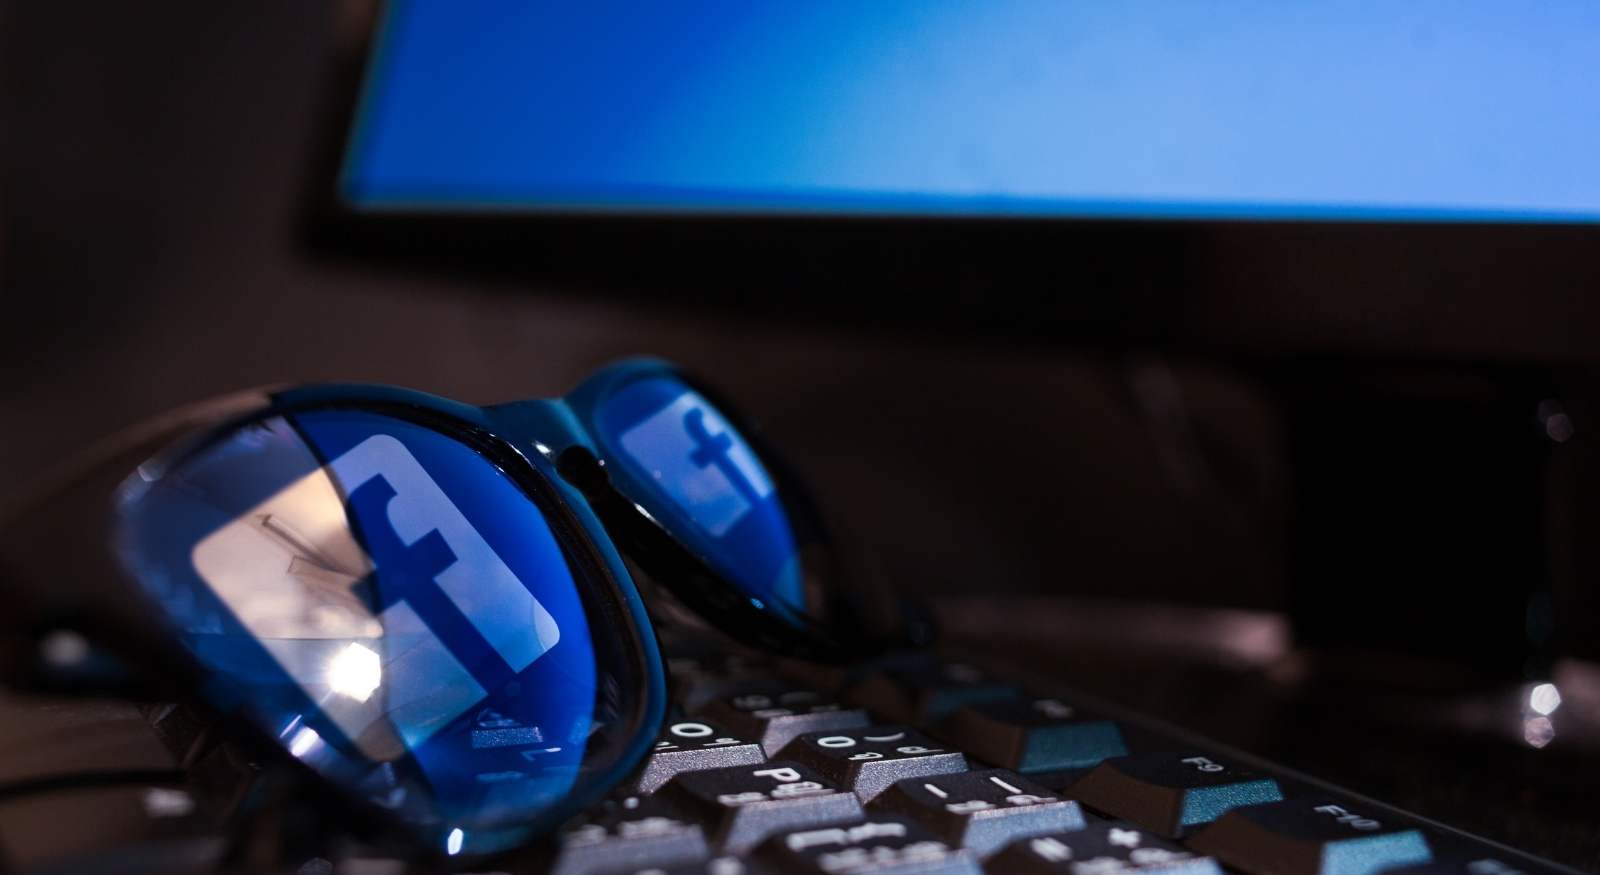 Personal Data of 500M+ Facebook Users Leaked Online